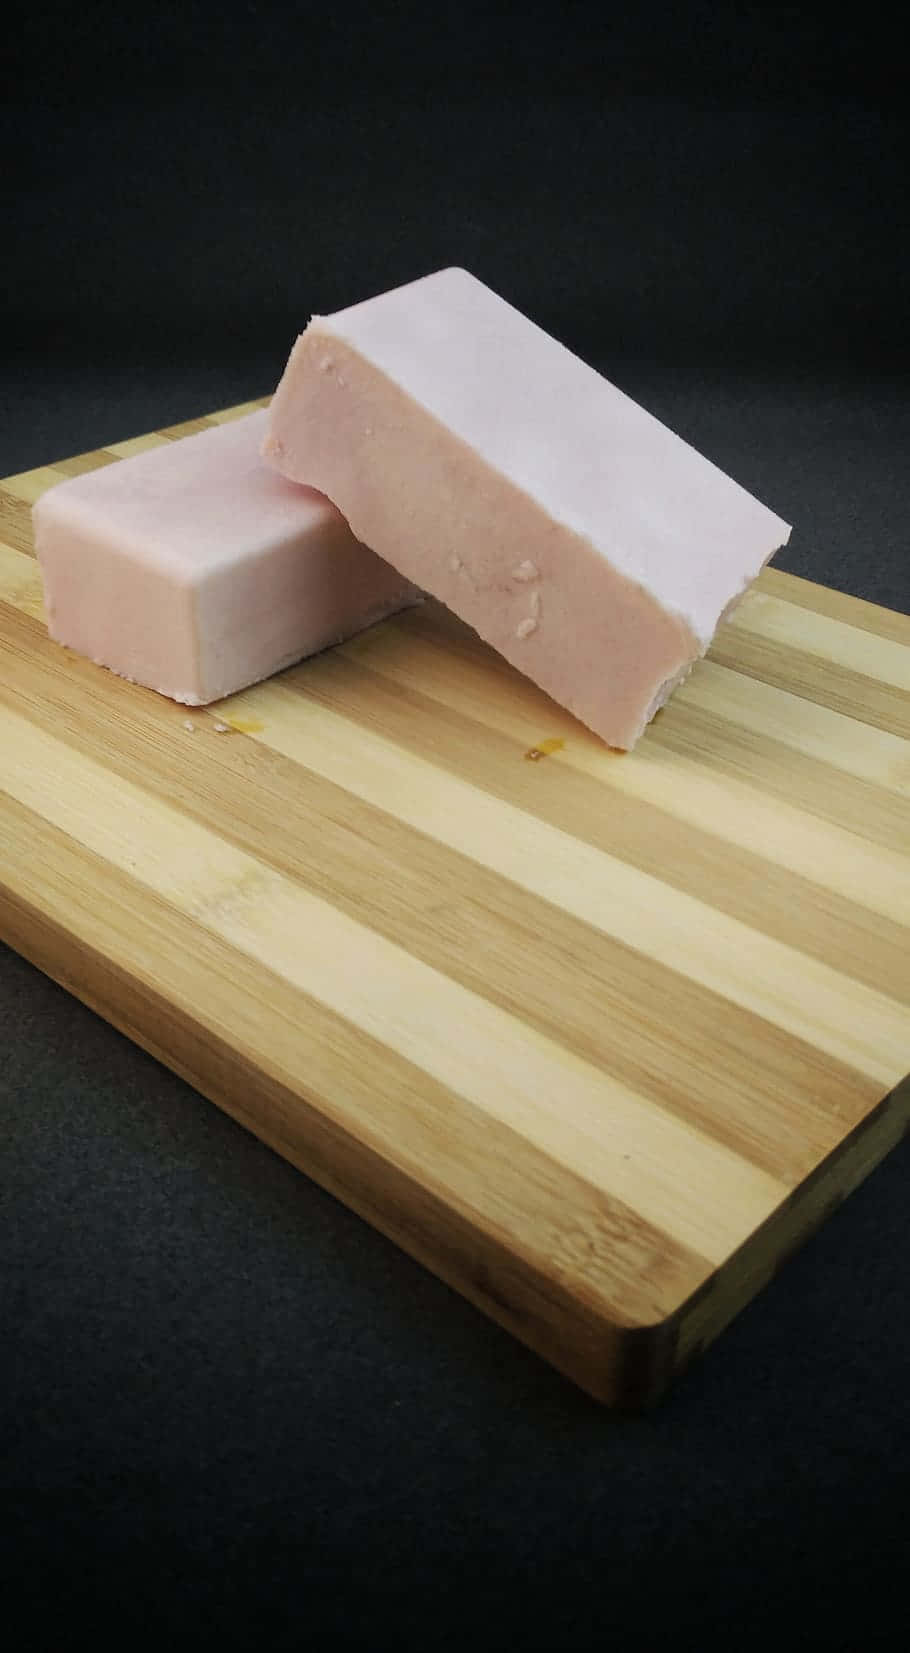 All-Natural Soap Bars on a Wooden Chopping Board Wallpaper